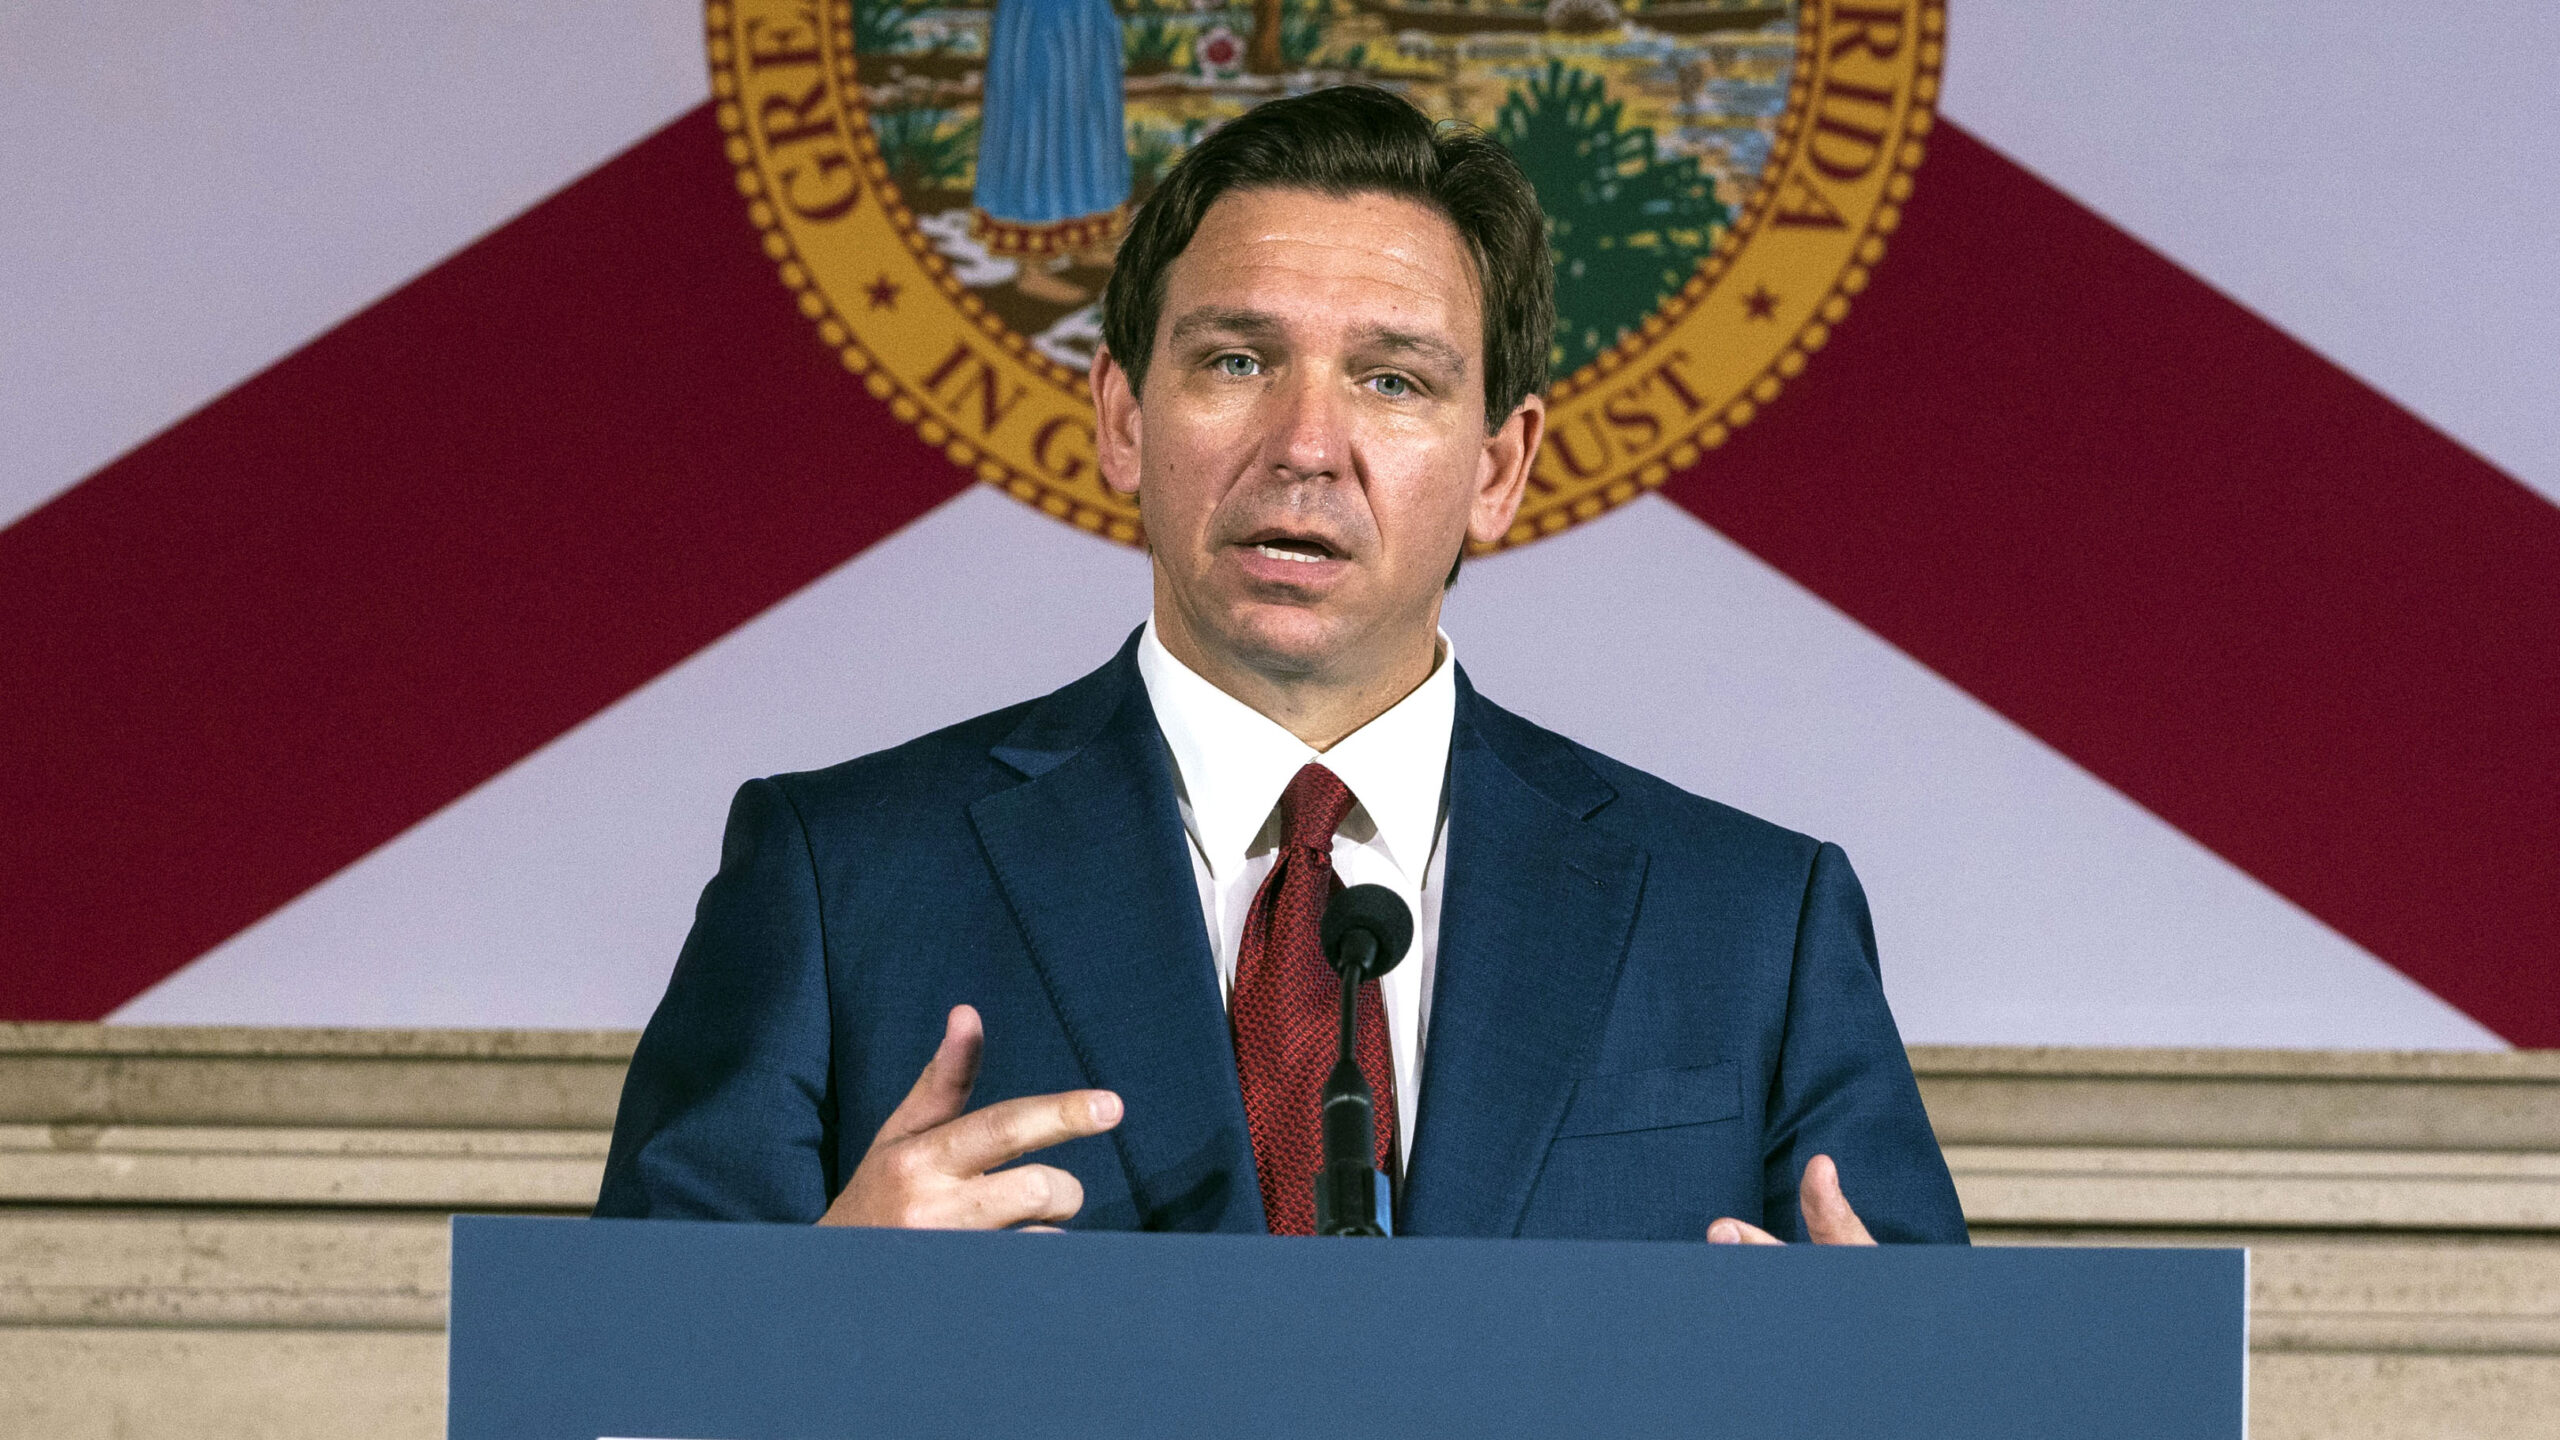 DeSantis prohibits surgery on minors and rejects woke initiatives.